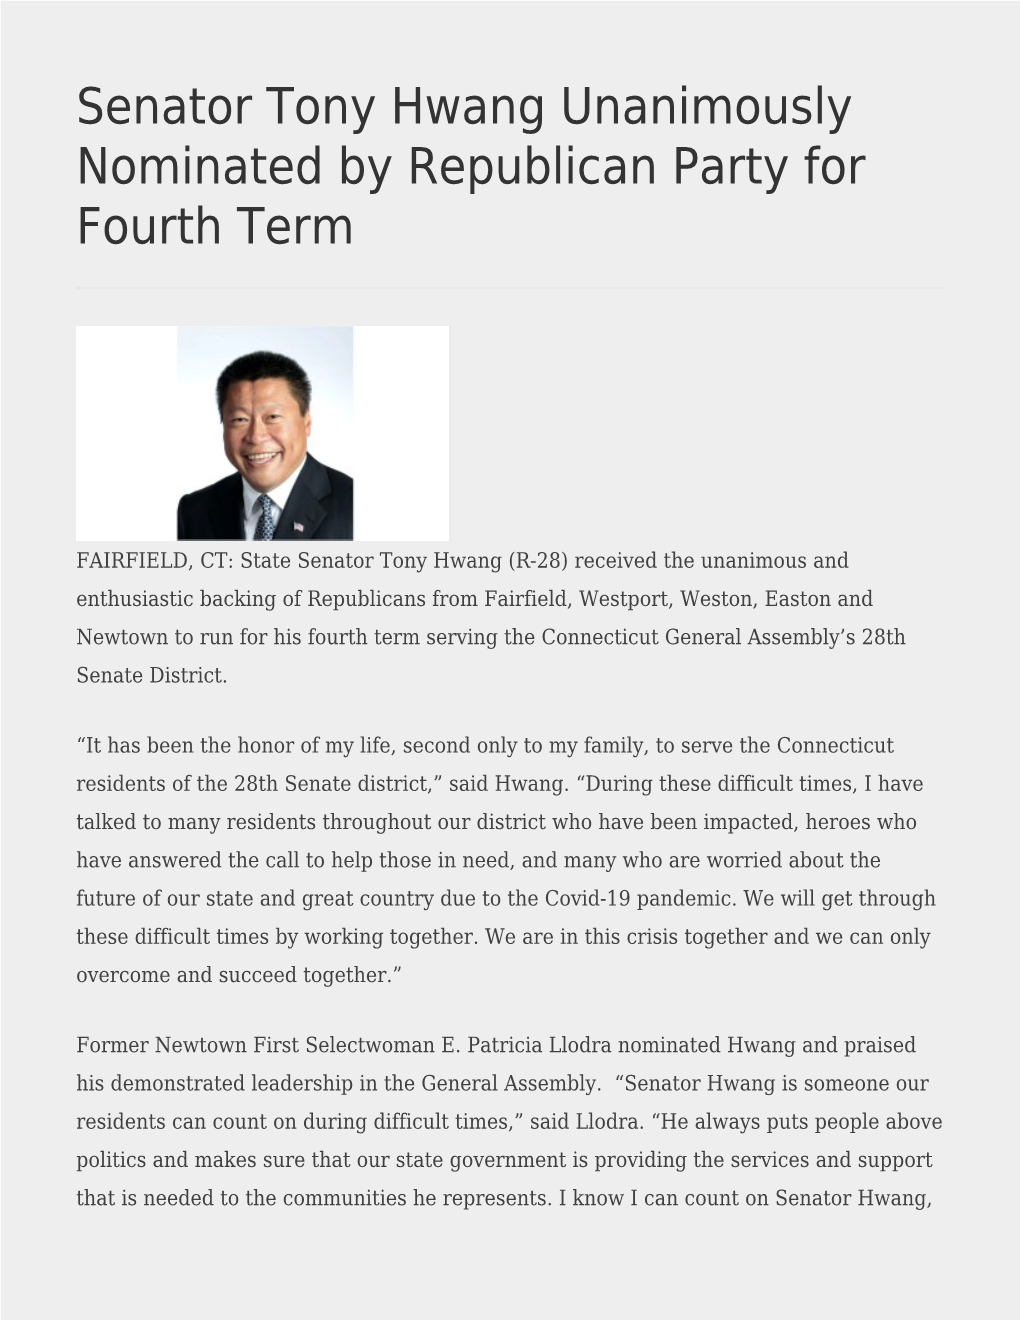 Senator Tony Hwang Unanimously Nominated by Republican Party for Fourth Term